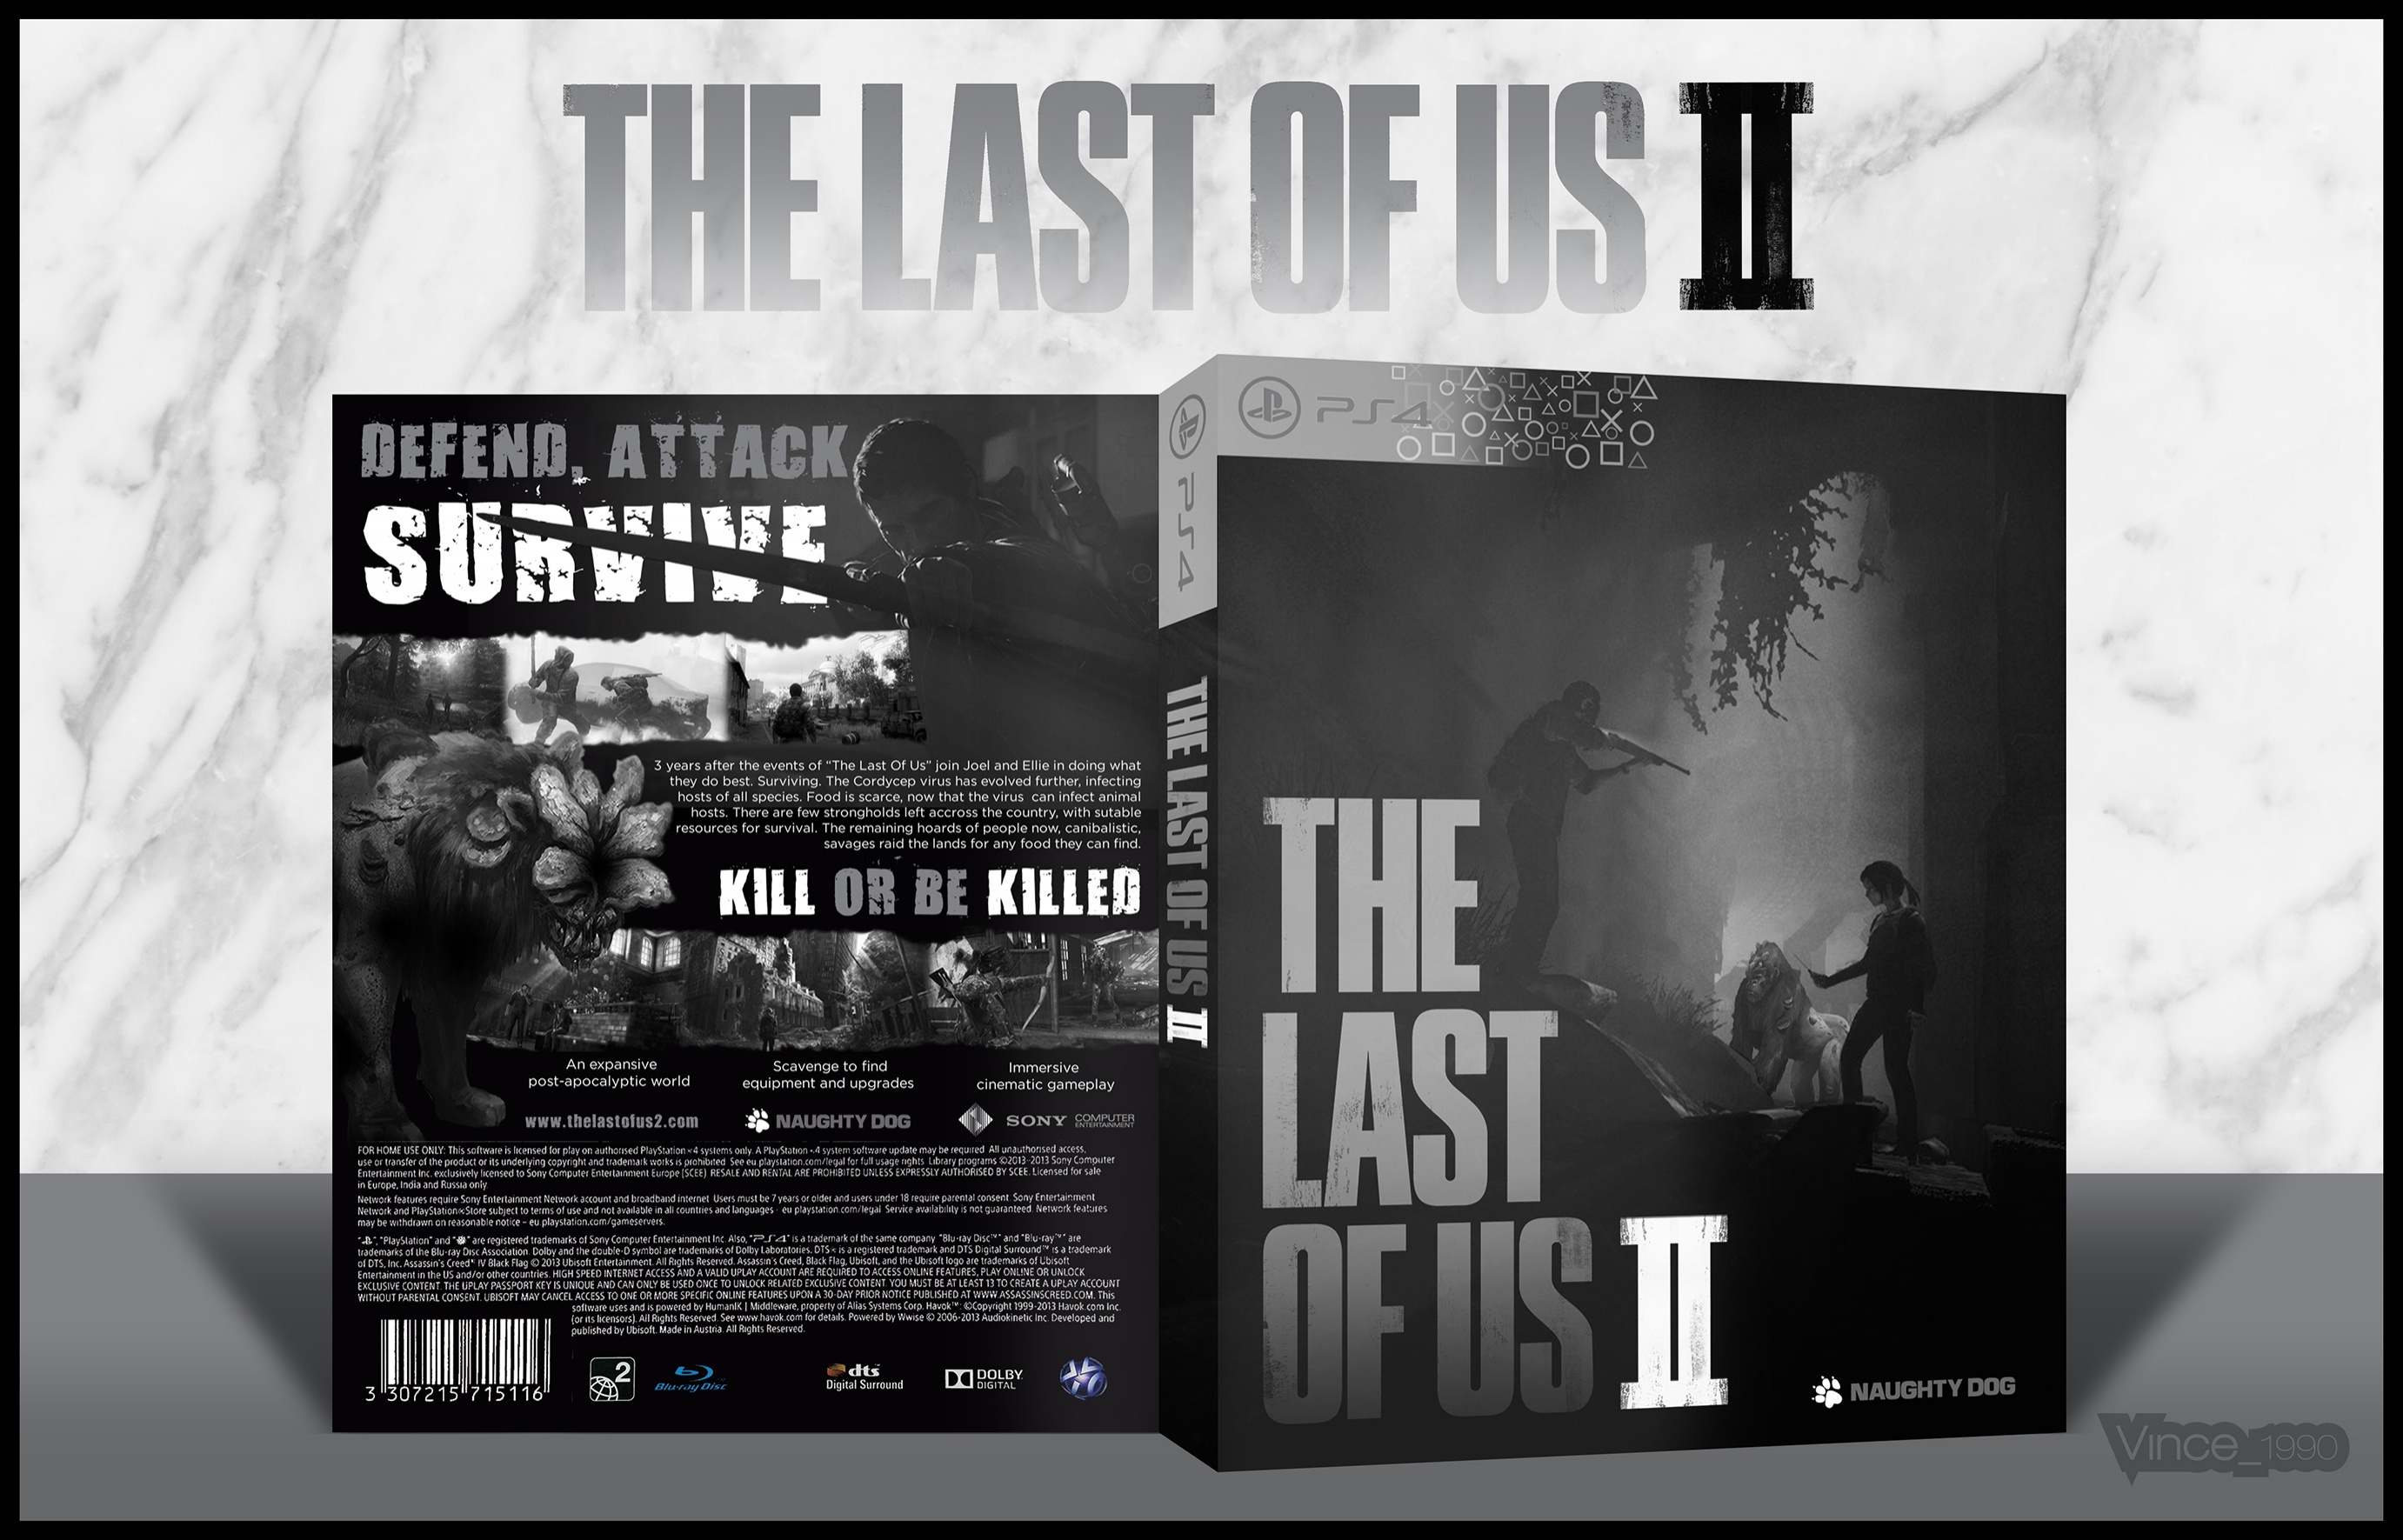 The Last of Us 2 box cover